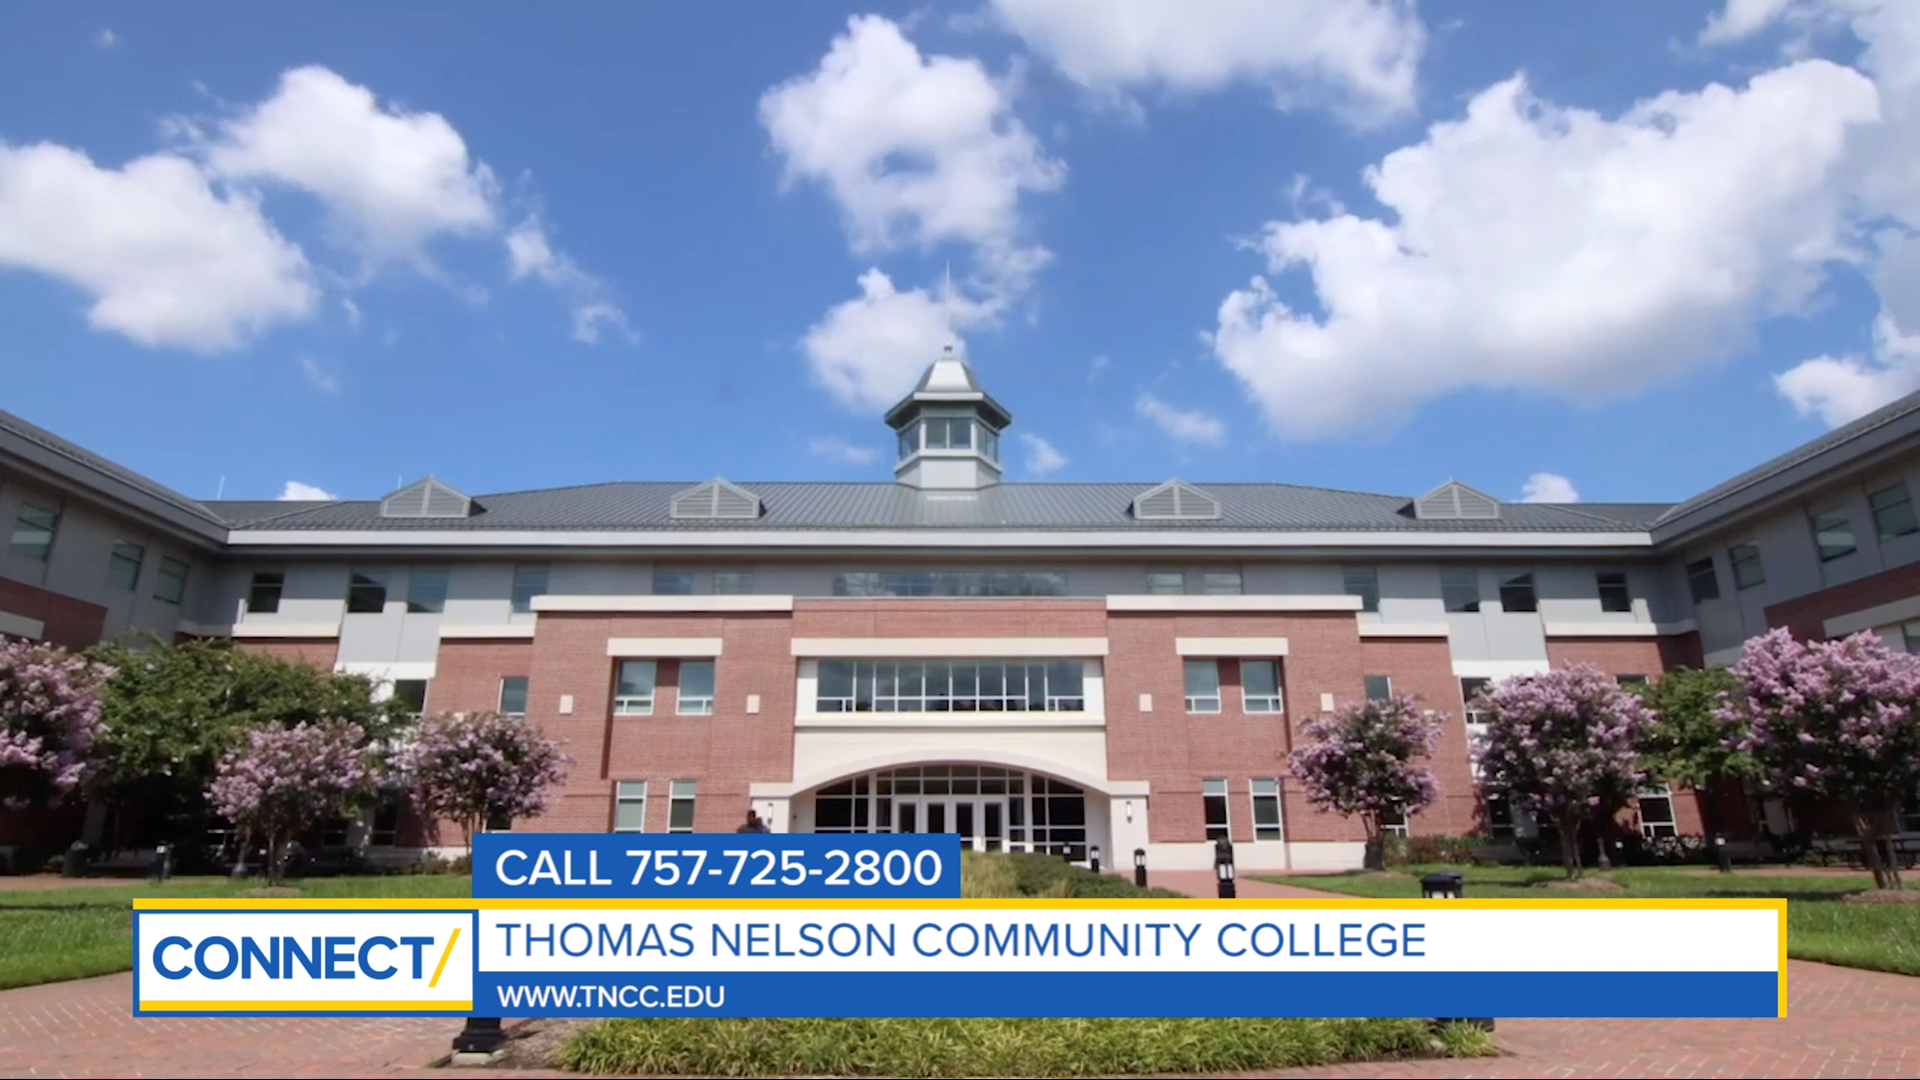 Dr. Towuanna Porter Brannon hopes Thomas Nelson Community College can help local businesses by addressing the labor shortage.